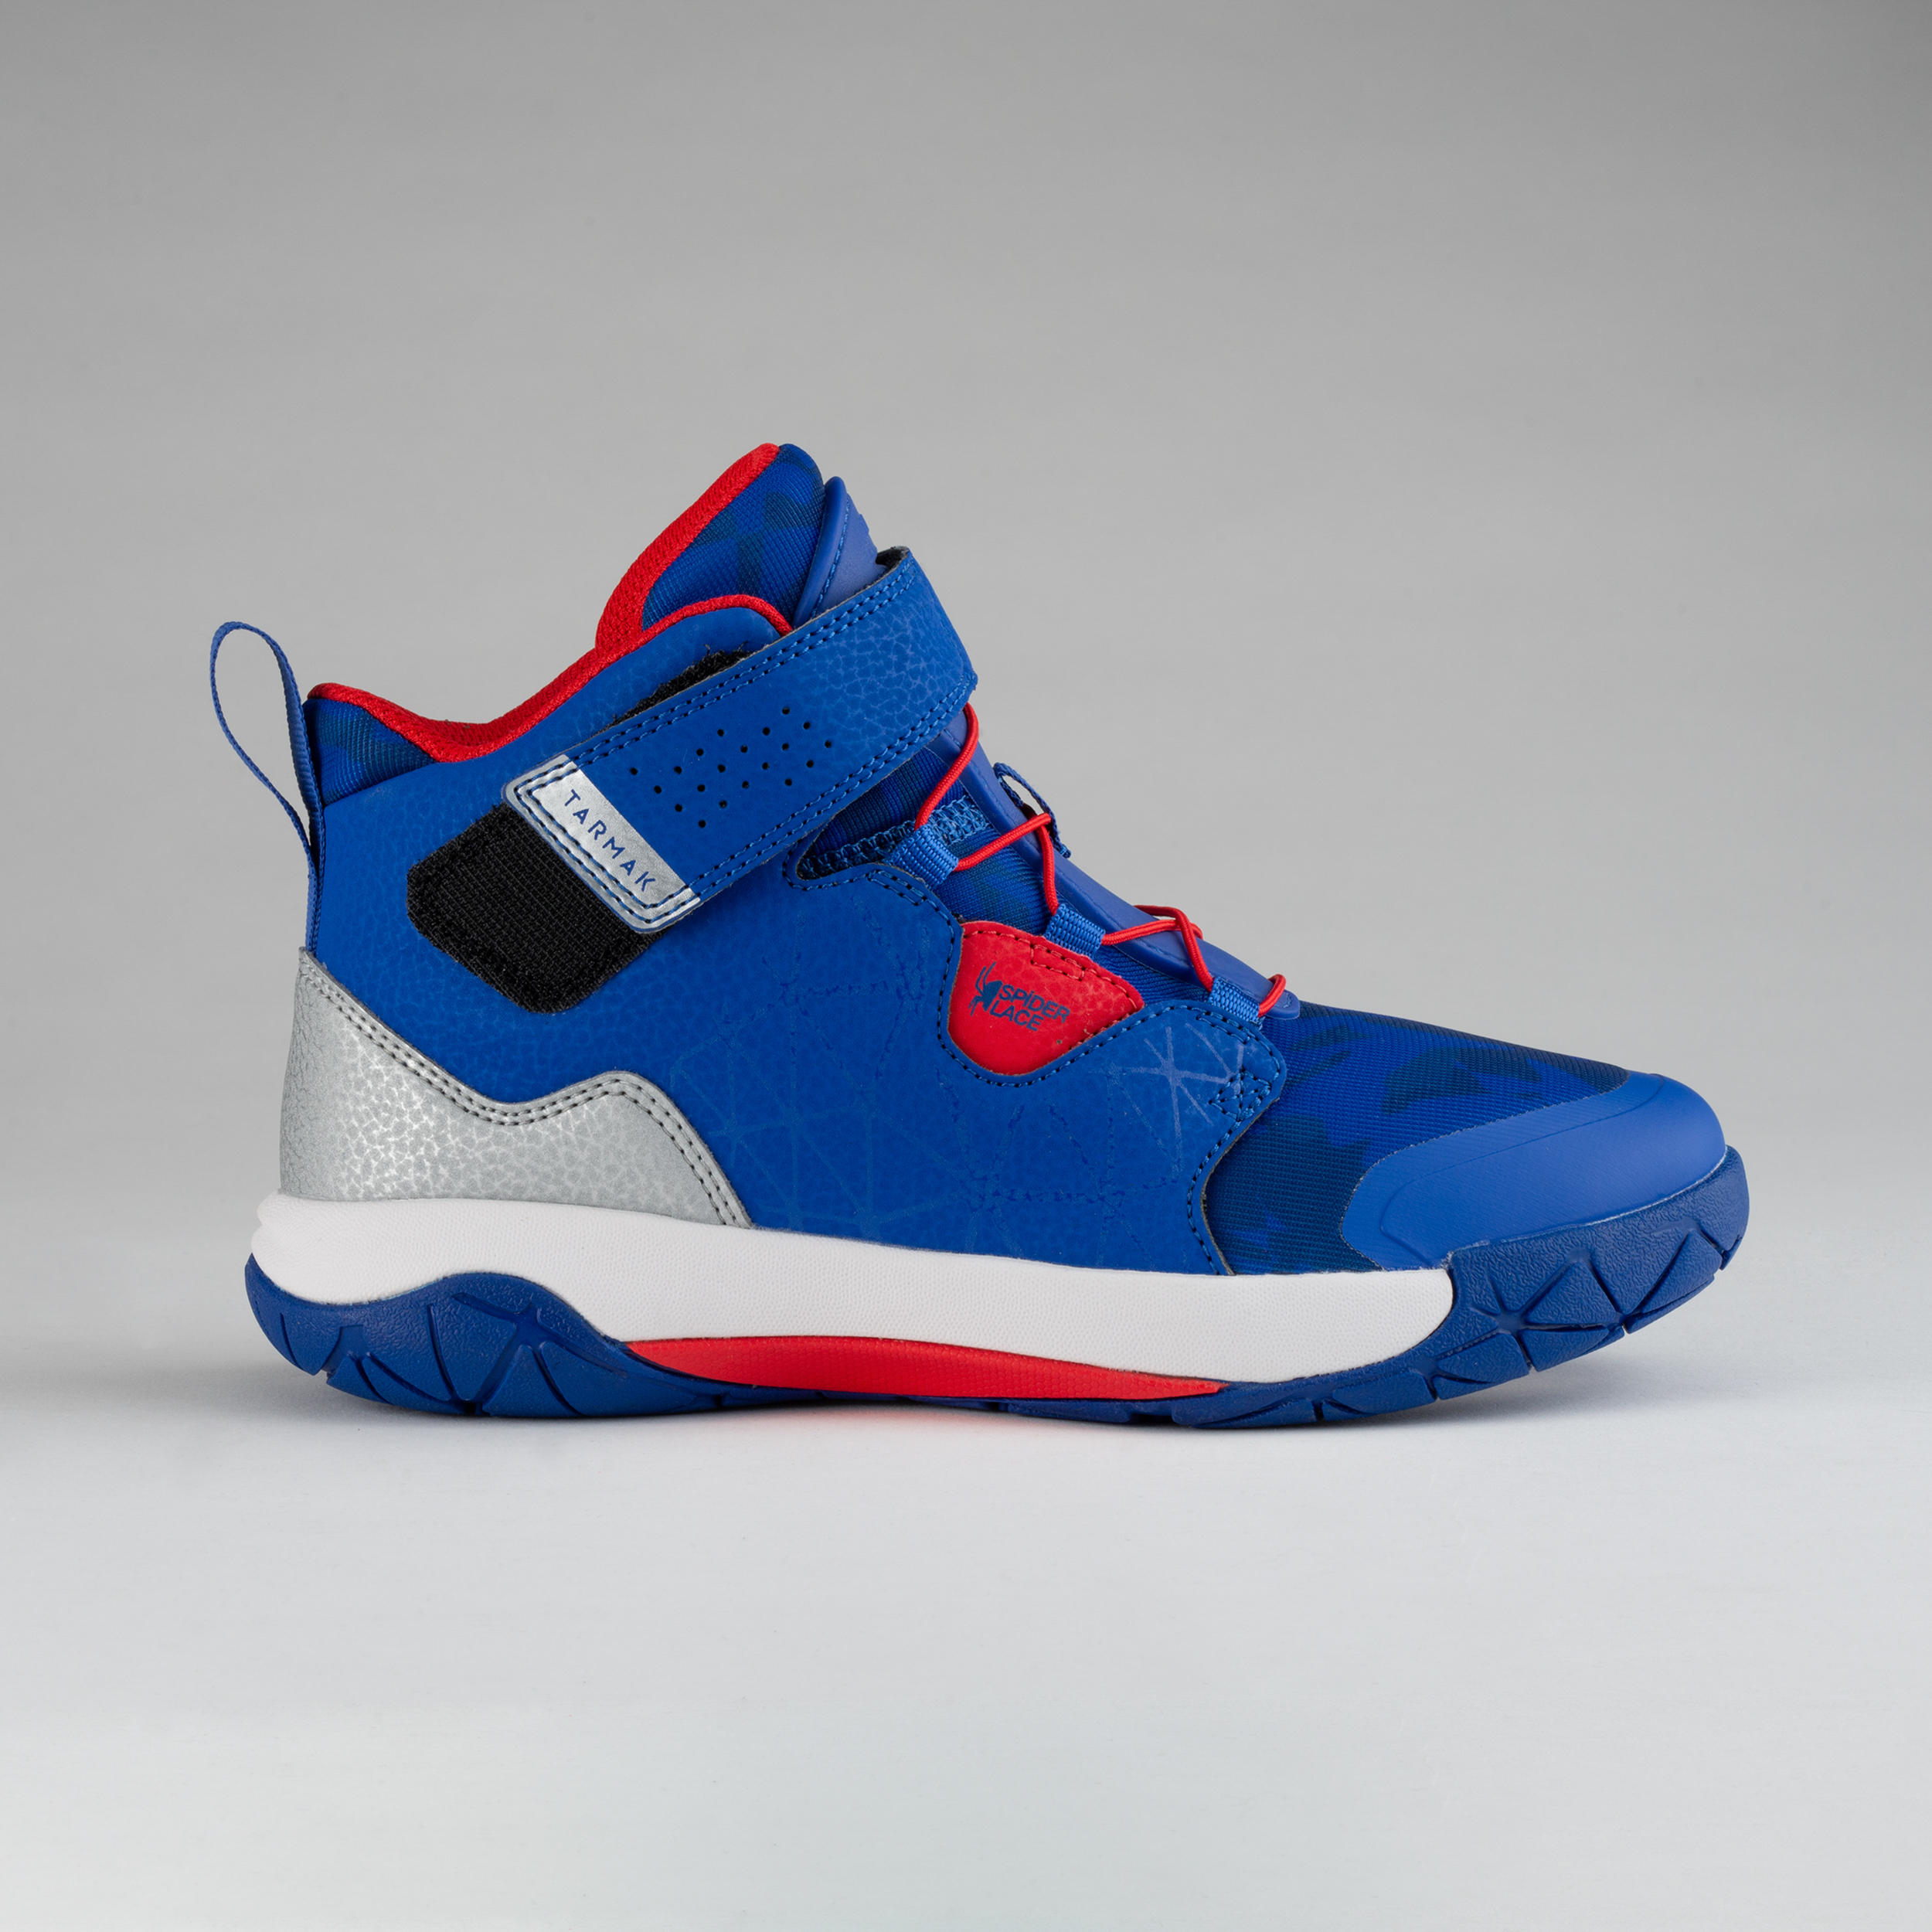 TARMAK Boys'/Girls' Intermediate Basketball Shoes - Blue/Red Spider Lace